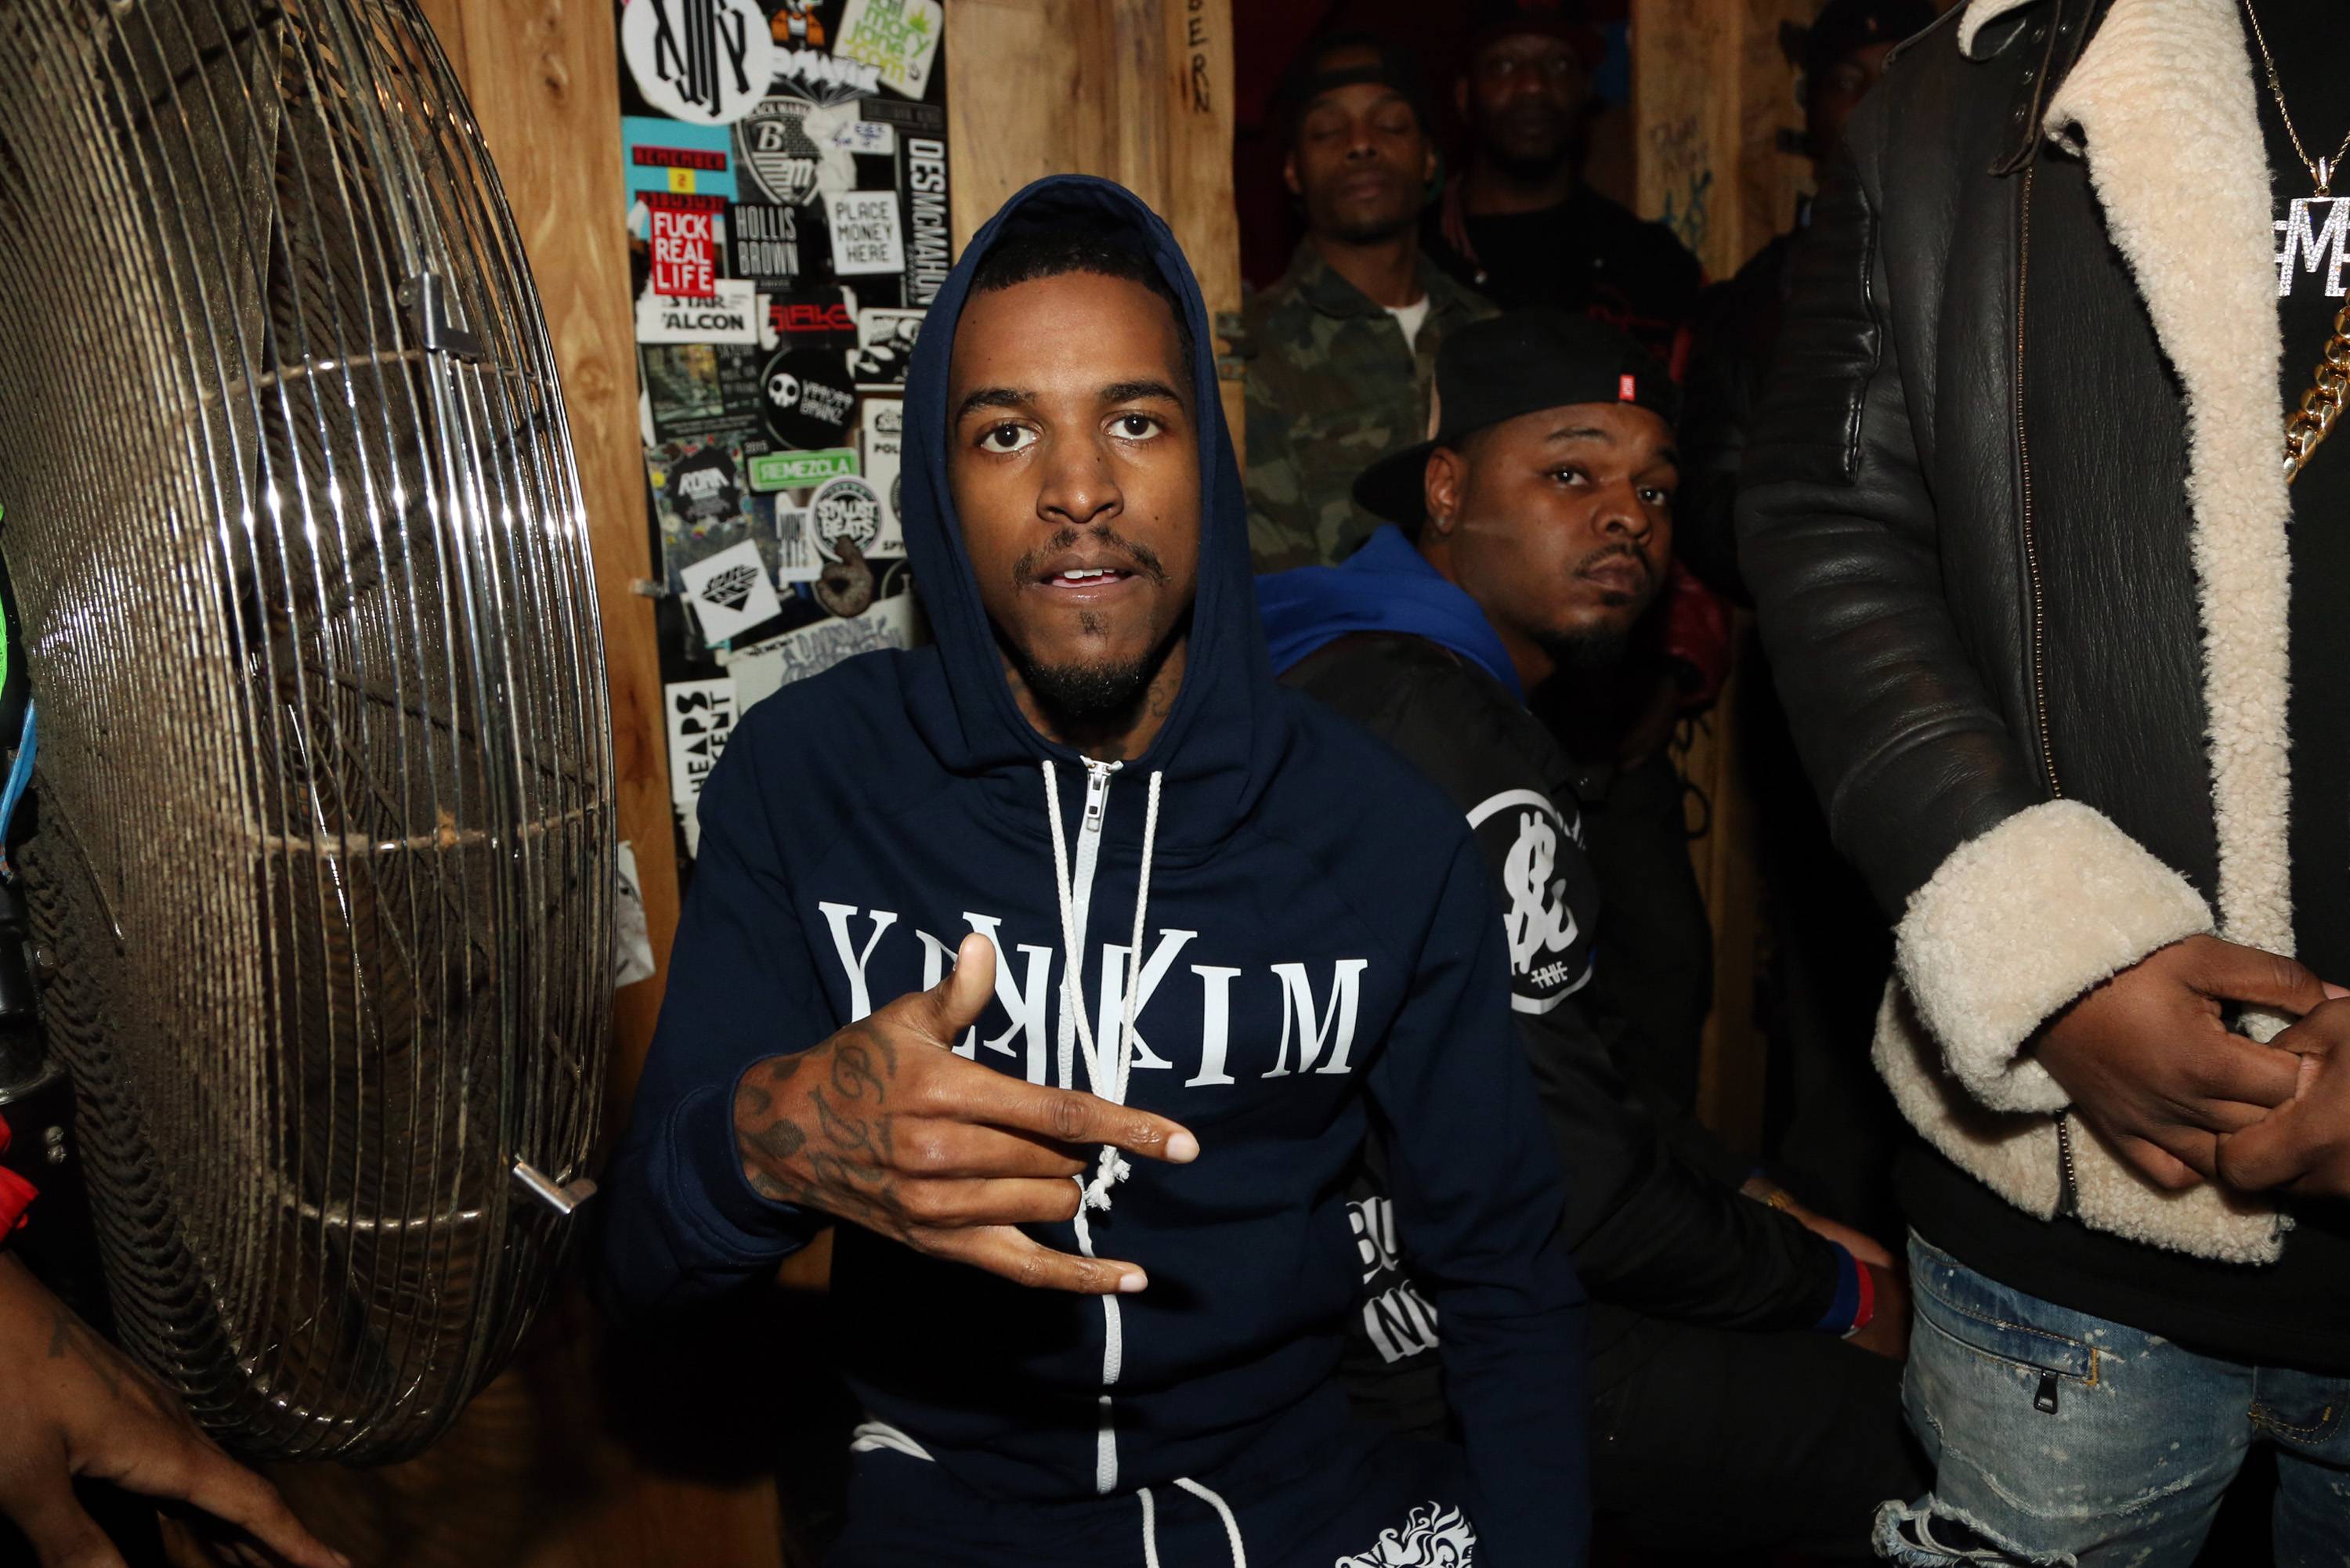 NEW YORK, NY - JANUARY 12:  Recording artist Lil Reese backstage at Webster Hall on January 12, 2016, in New York City.  (Photo by Johnny Nunez/WireImage)